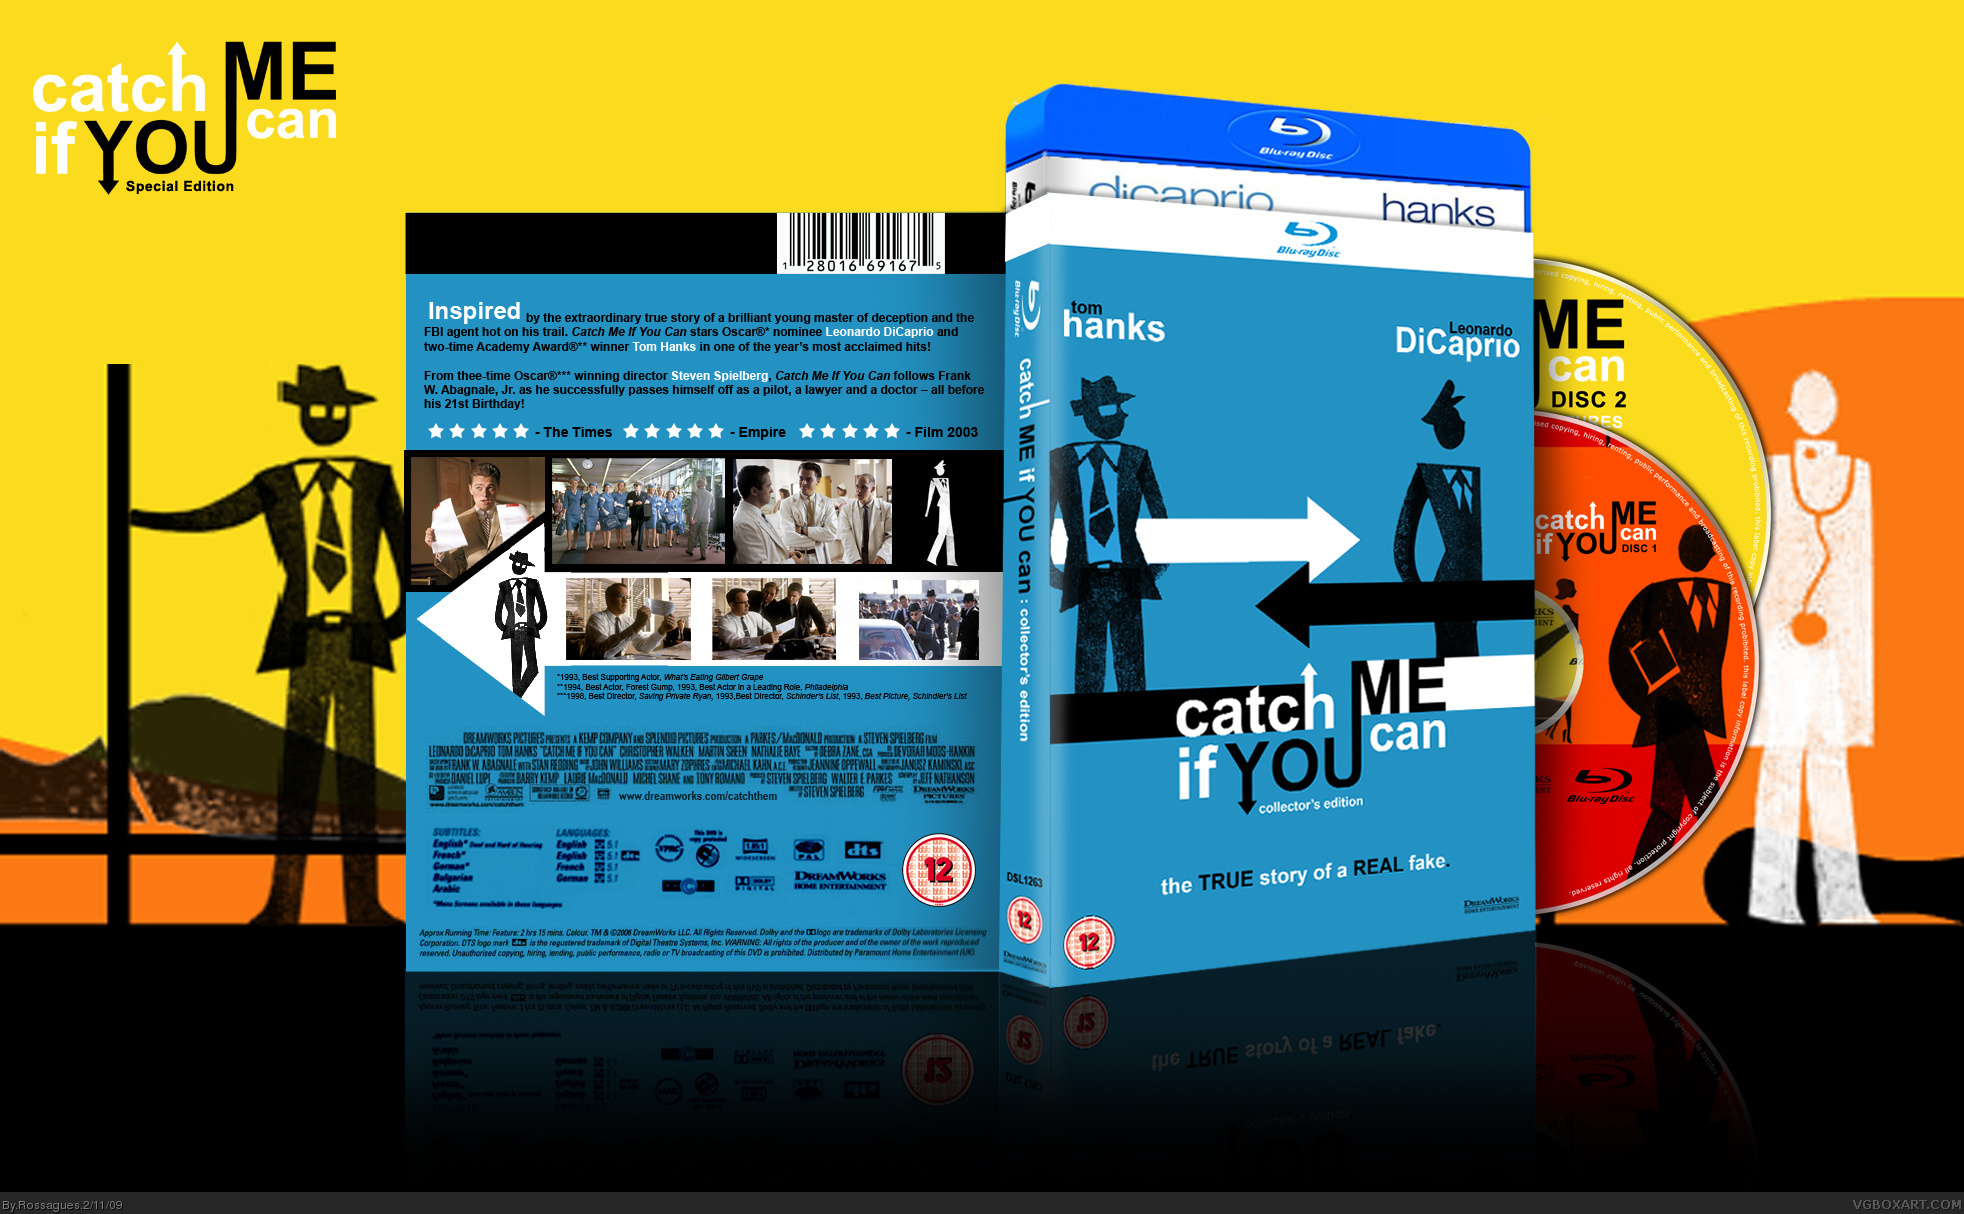 Catch Me If You Can: Special Edition box cover